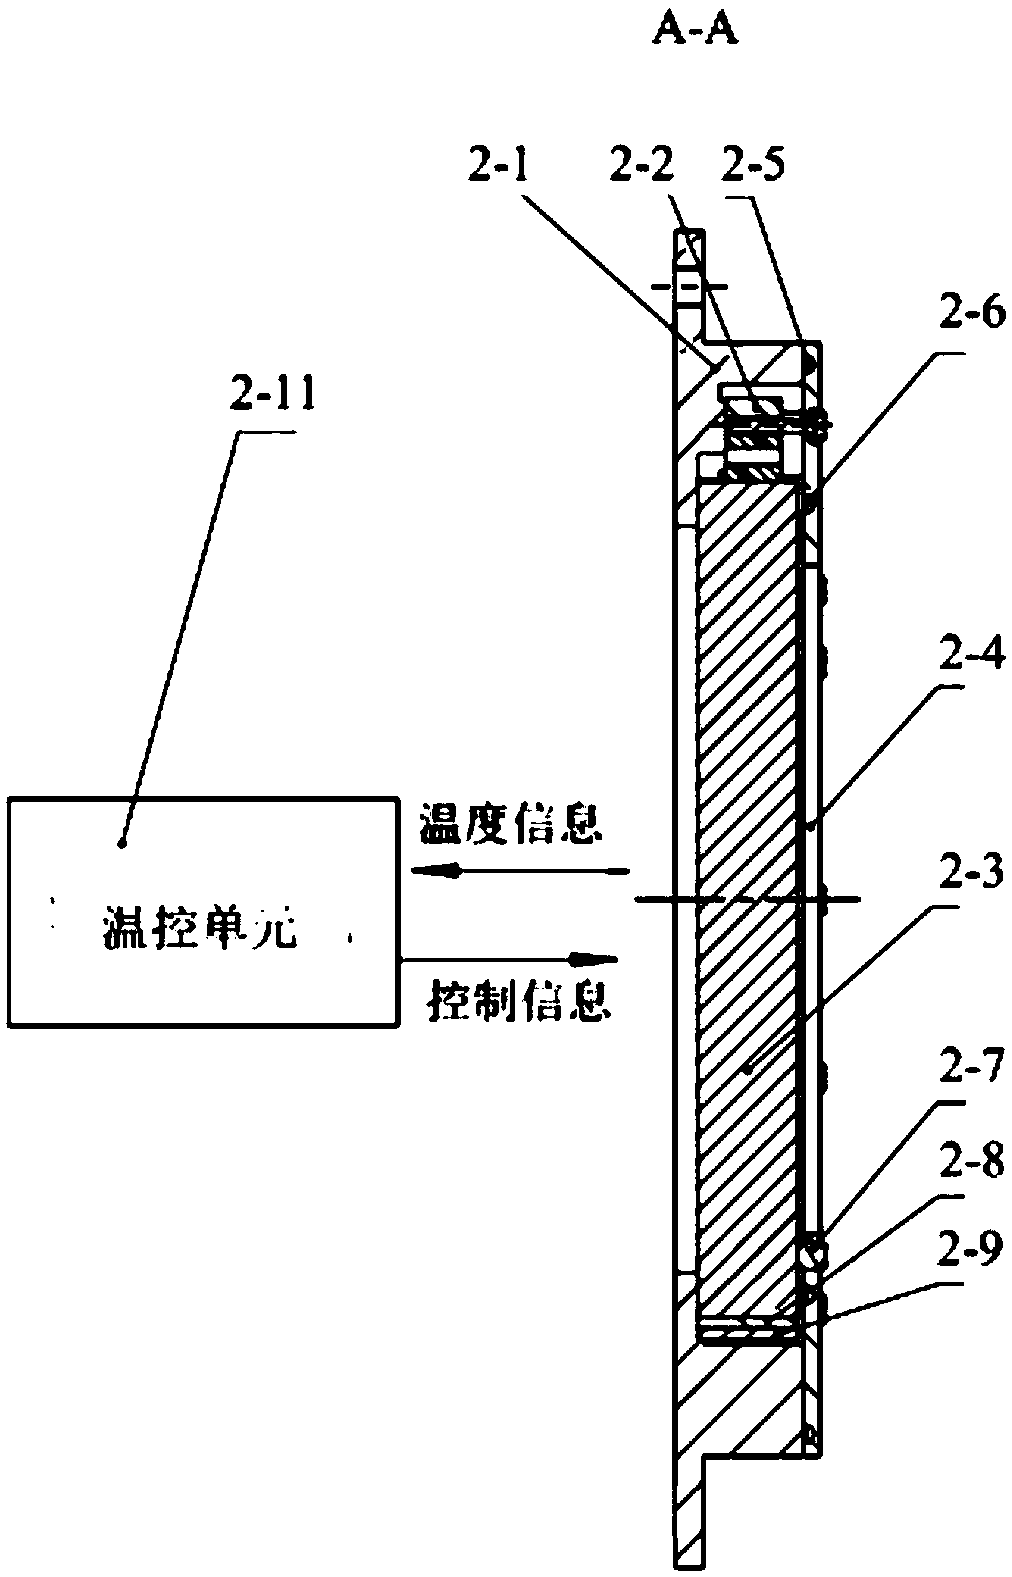 Device for quantitatively evaluating image quality of photoelectric imaging system under boundary temperature condition